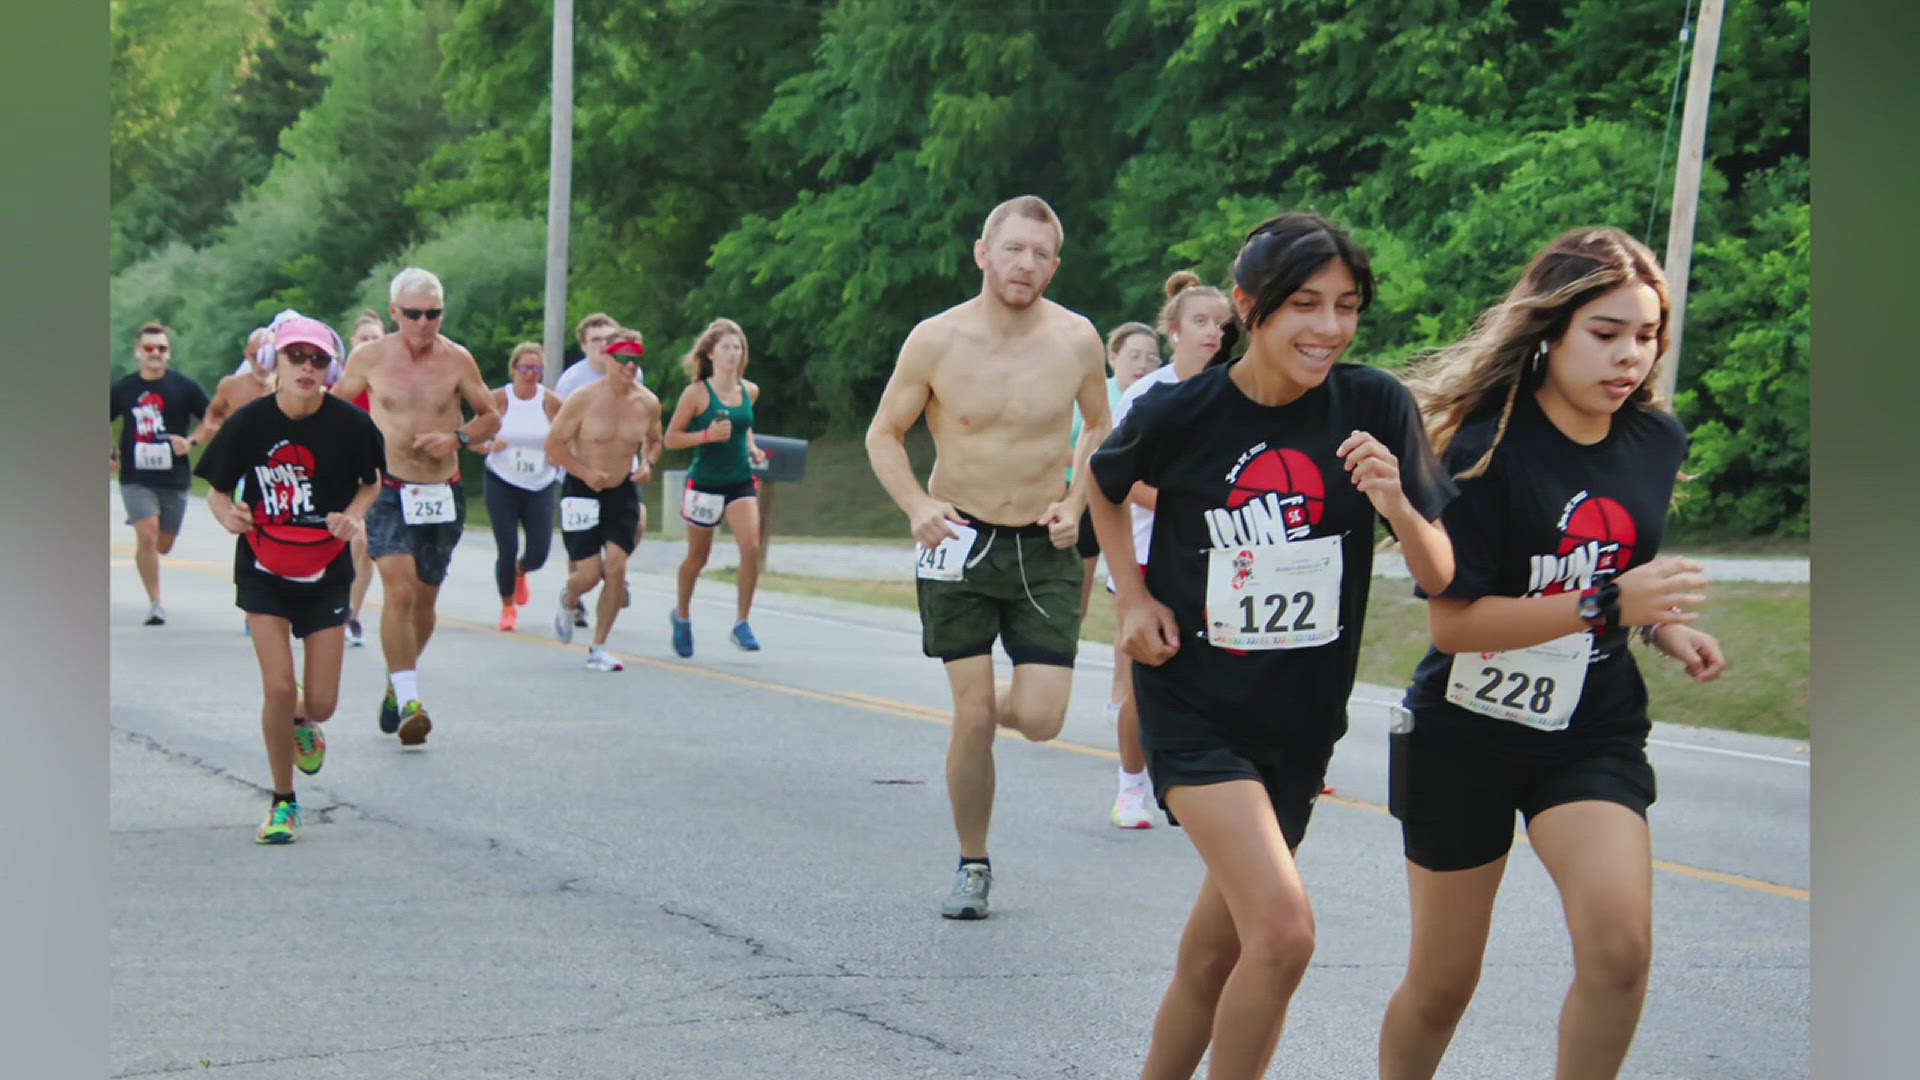 The 5K & 1-mile Fun Run will take place in Coal Valley on Saturday, June 29. Funds will go toward Gilda's Club Quad Cities, benefitting families impacted by cancer.